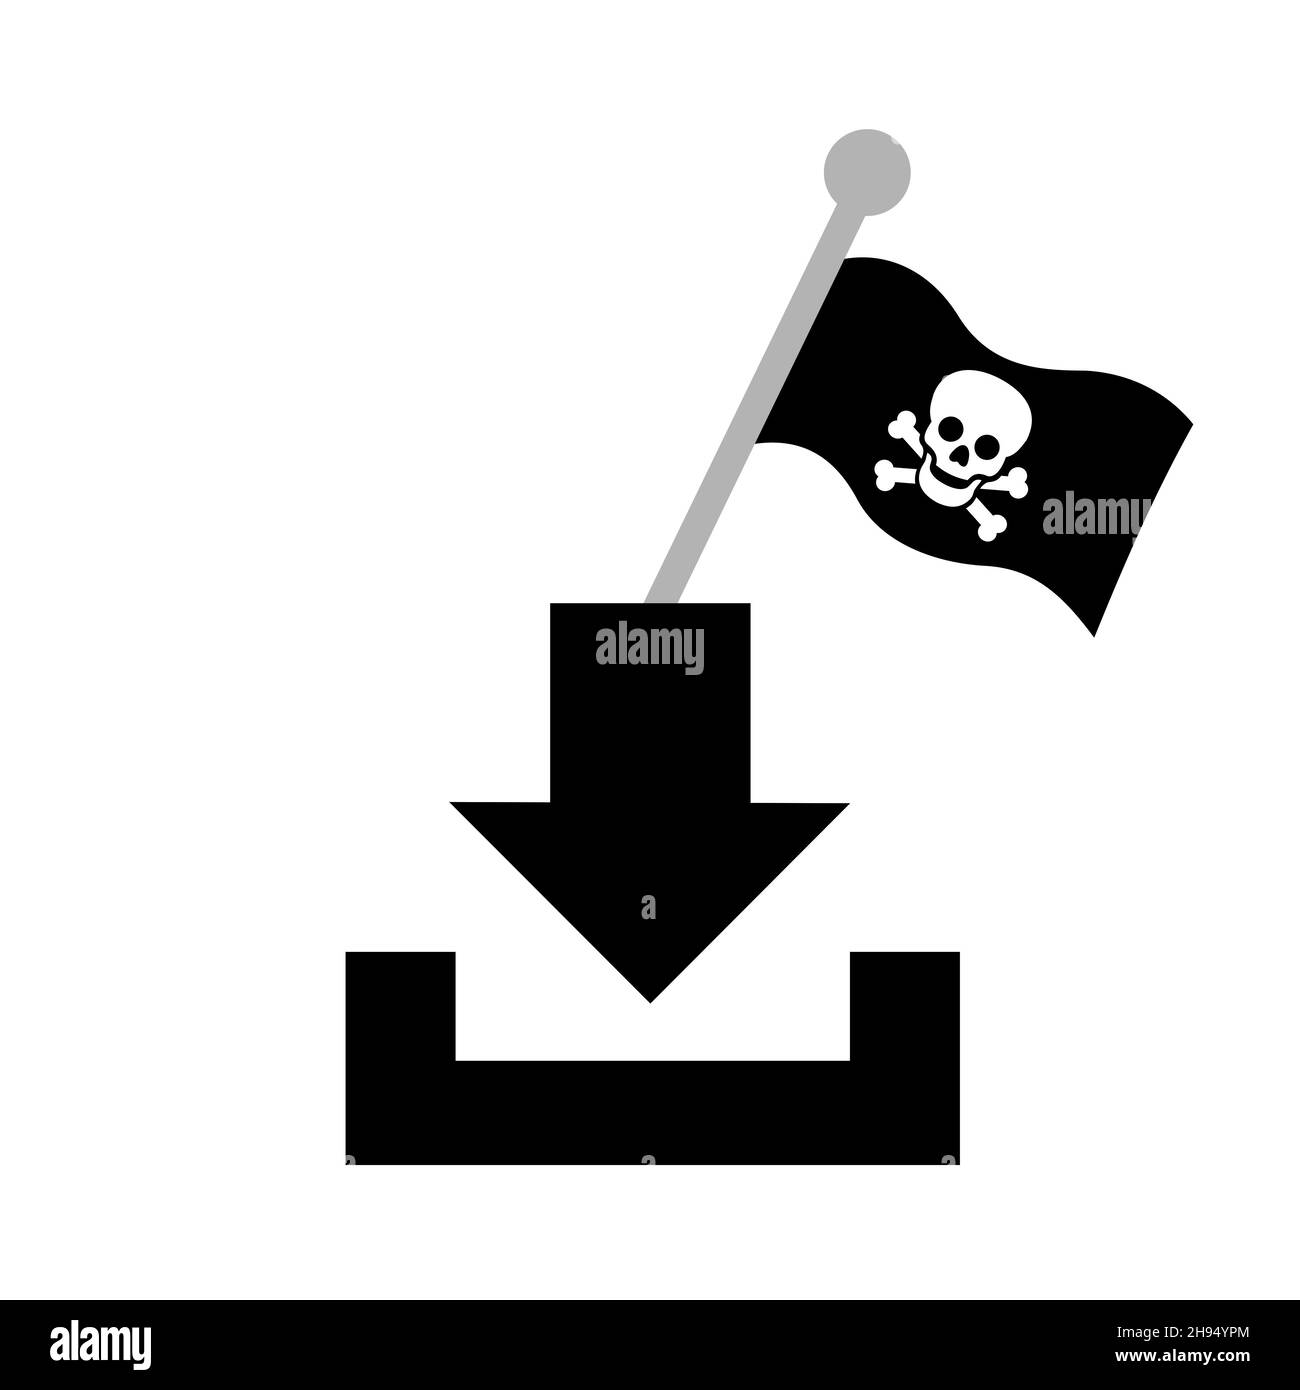 Downloading and piracy - illegal and criminal file and data downloading. Icon, sign, symbol and pictogram. Vector illustration isolated on white. Stock Photo